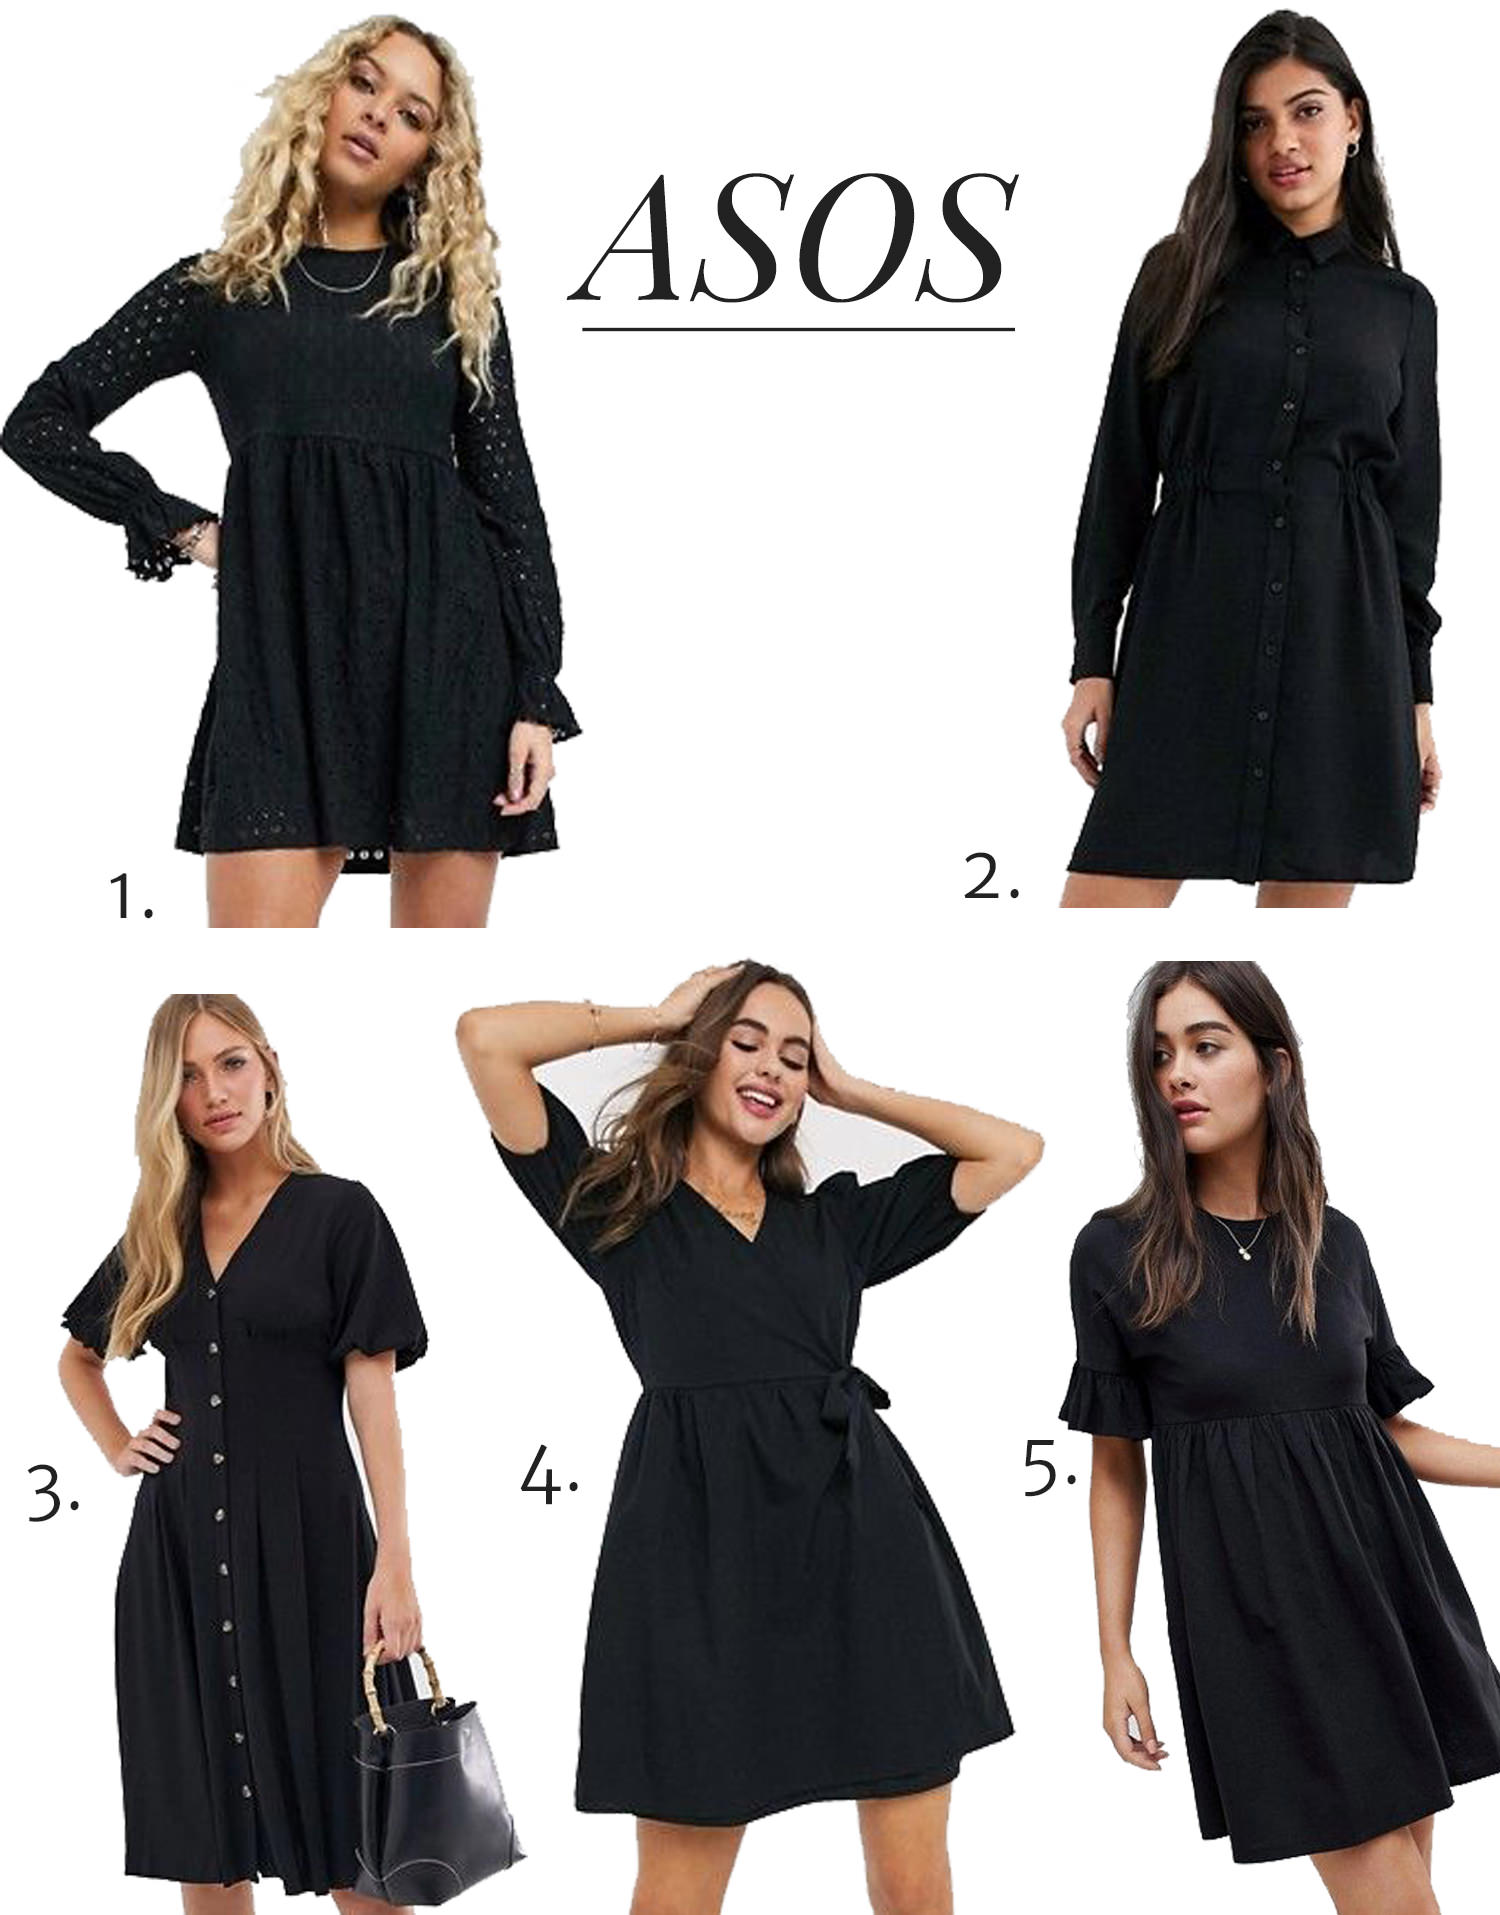 WHAT TO WEAR FOR VENDORS ASOS